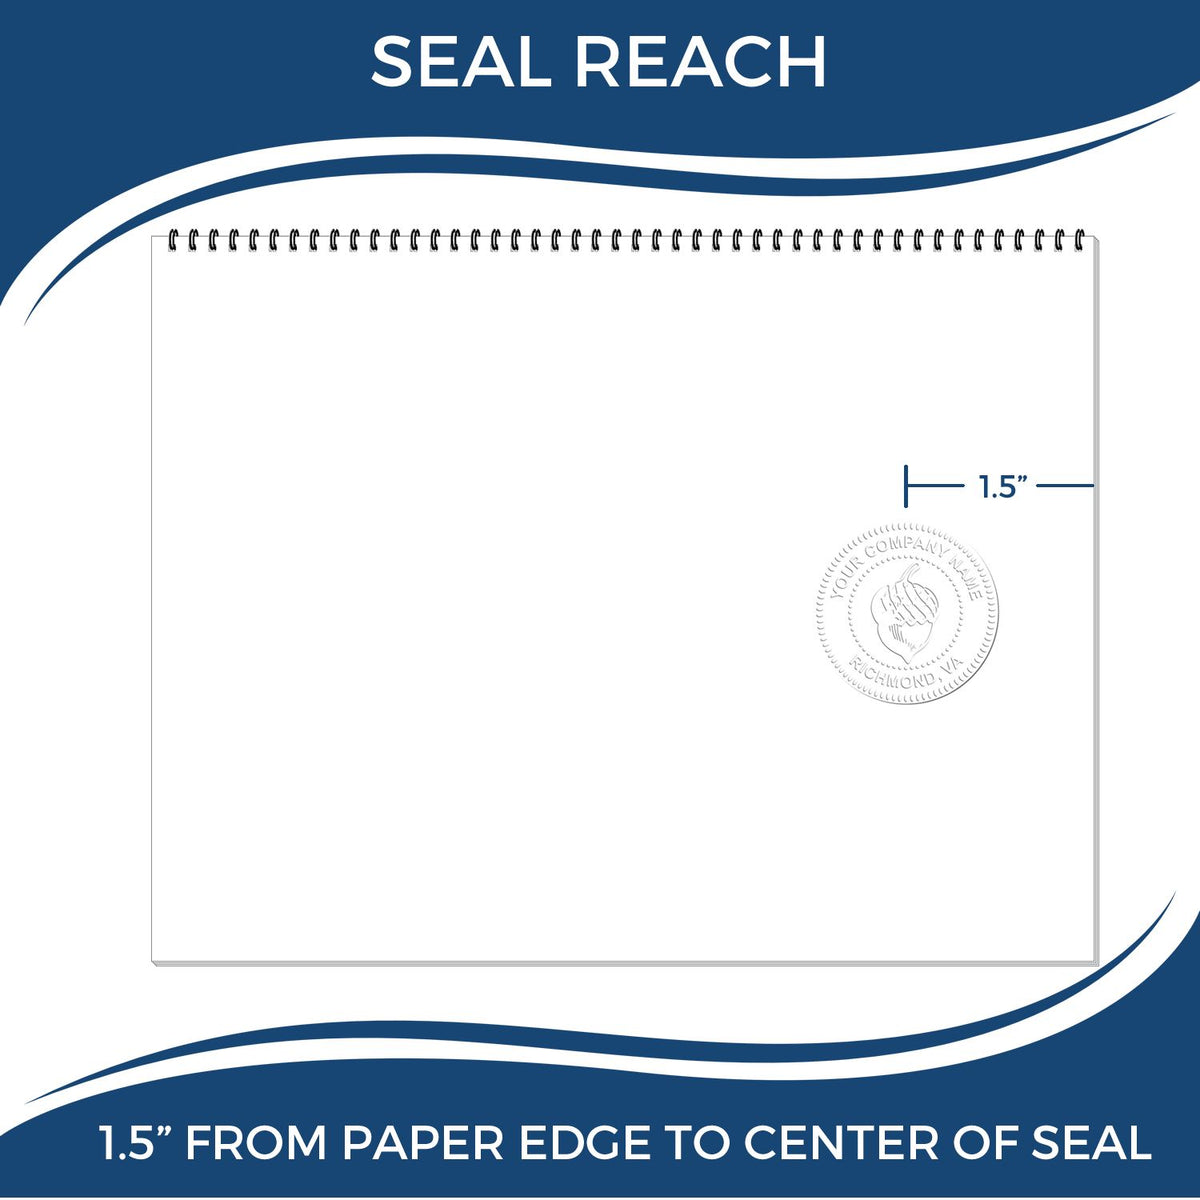 An infographic showing the seal reach which is represented by a ruler and a miniature seal image of the Indiana Desk Architect Embossing Seal